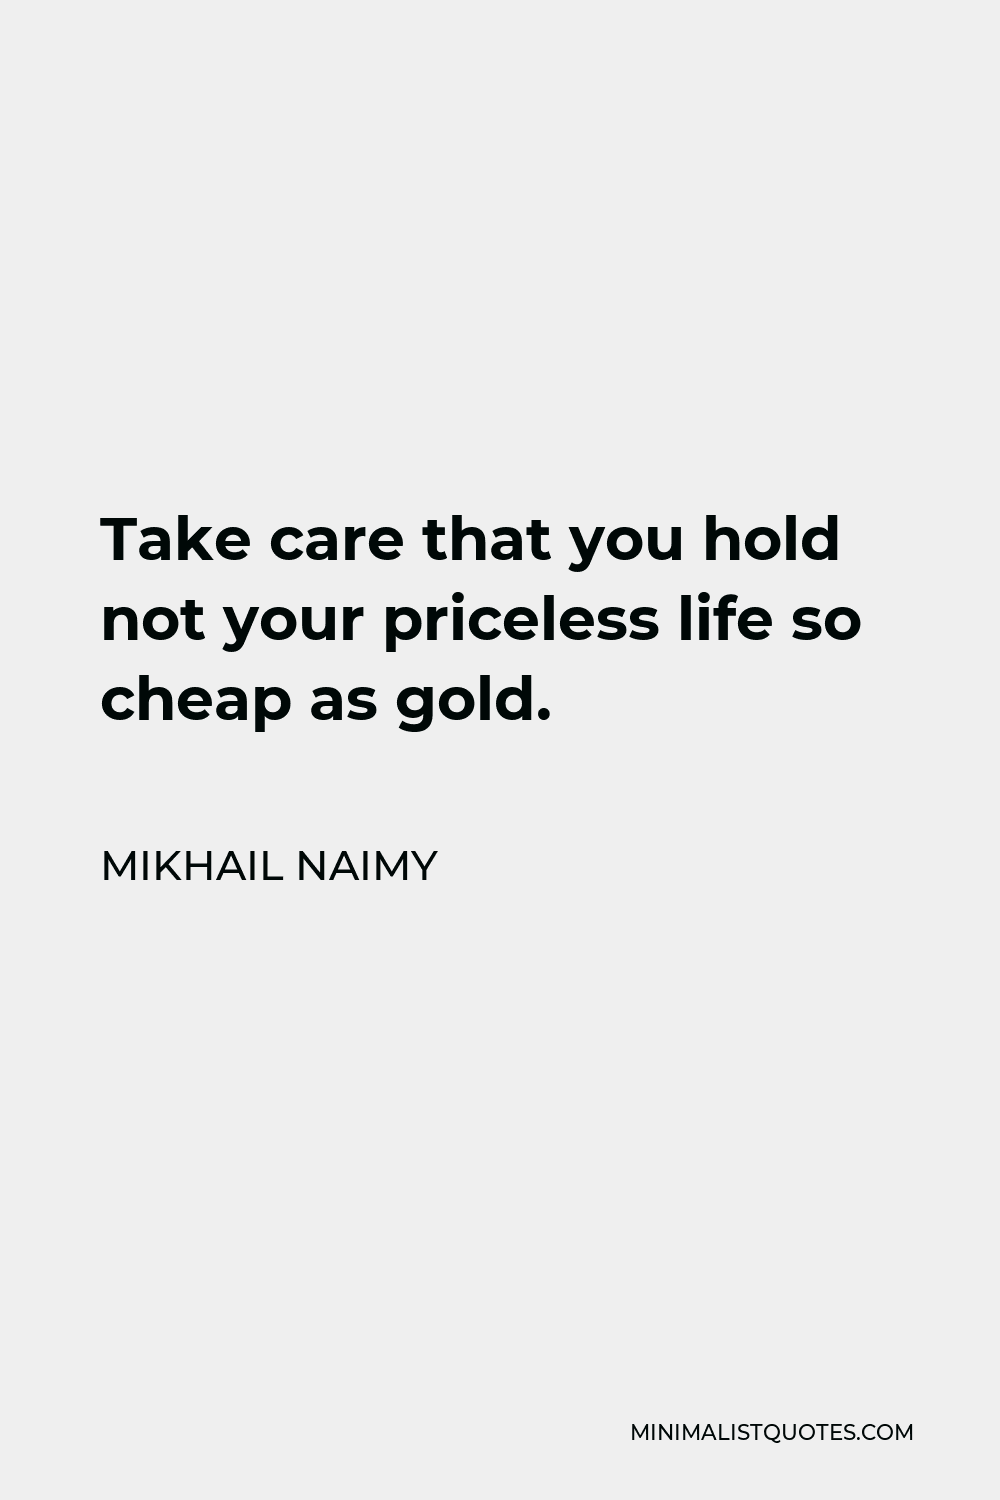 Mikhail Naimy Quote - Take care that you hold not your priceless life so cheap as gold.